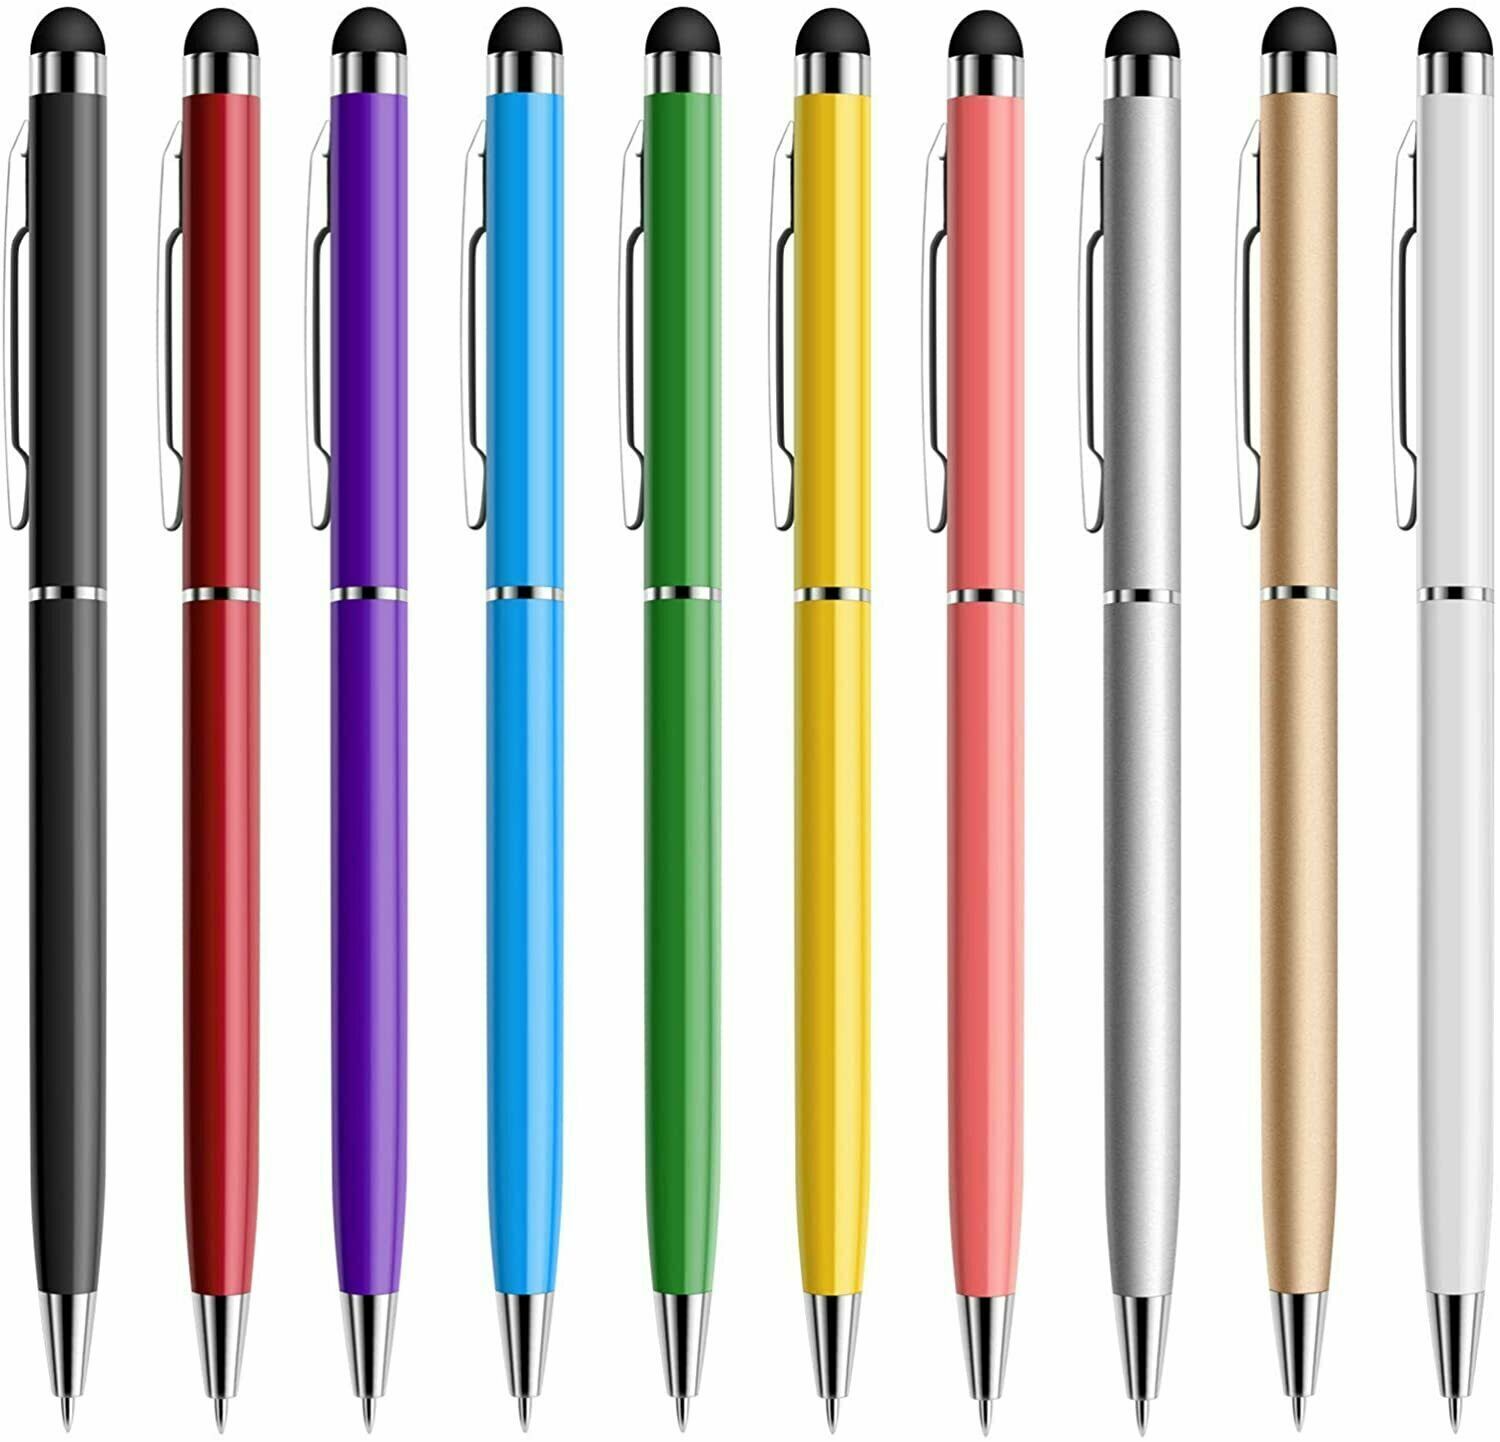 20x 2 in 1 Touch Screen Pen Stylus Thin Capacitive Universal For Tablet Phone PC